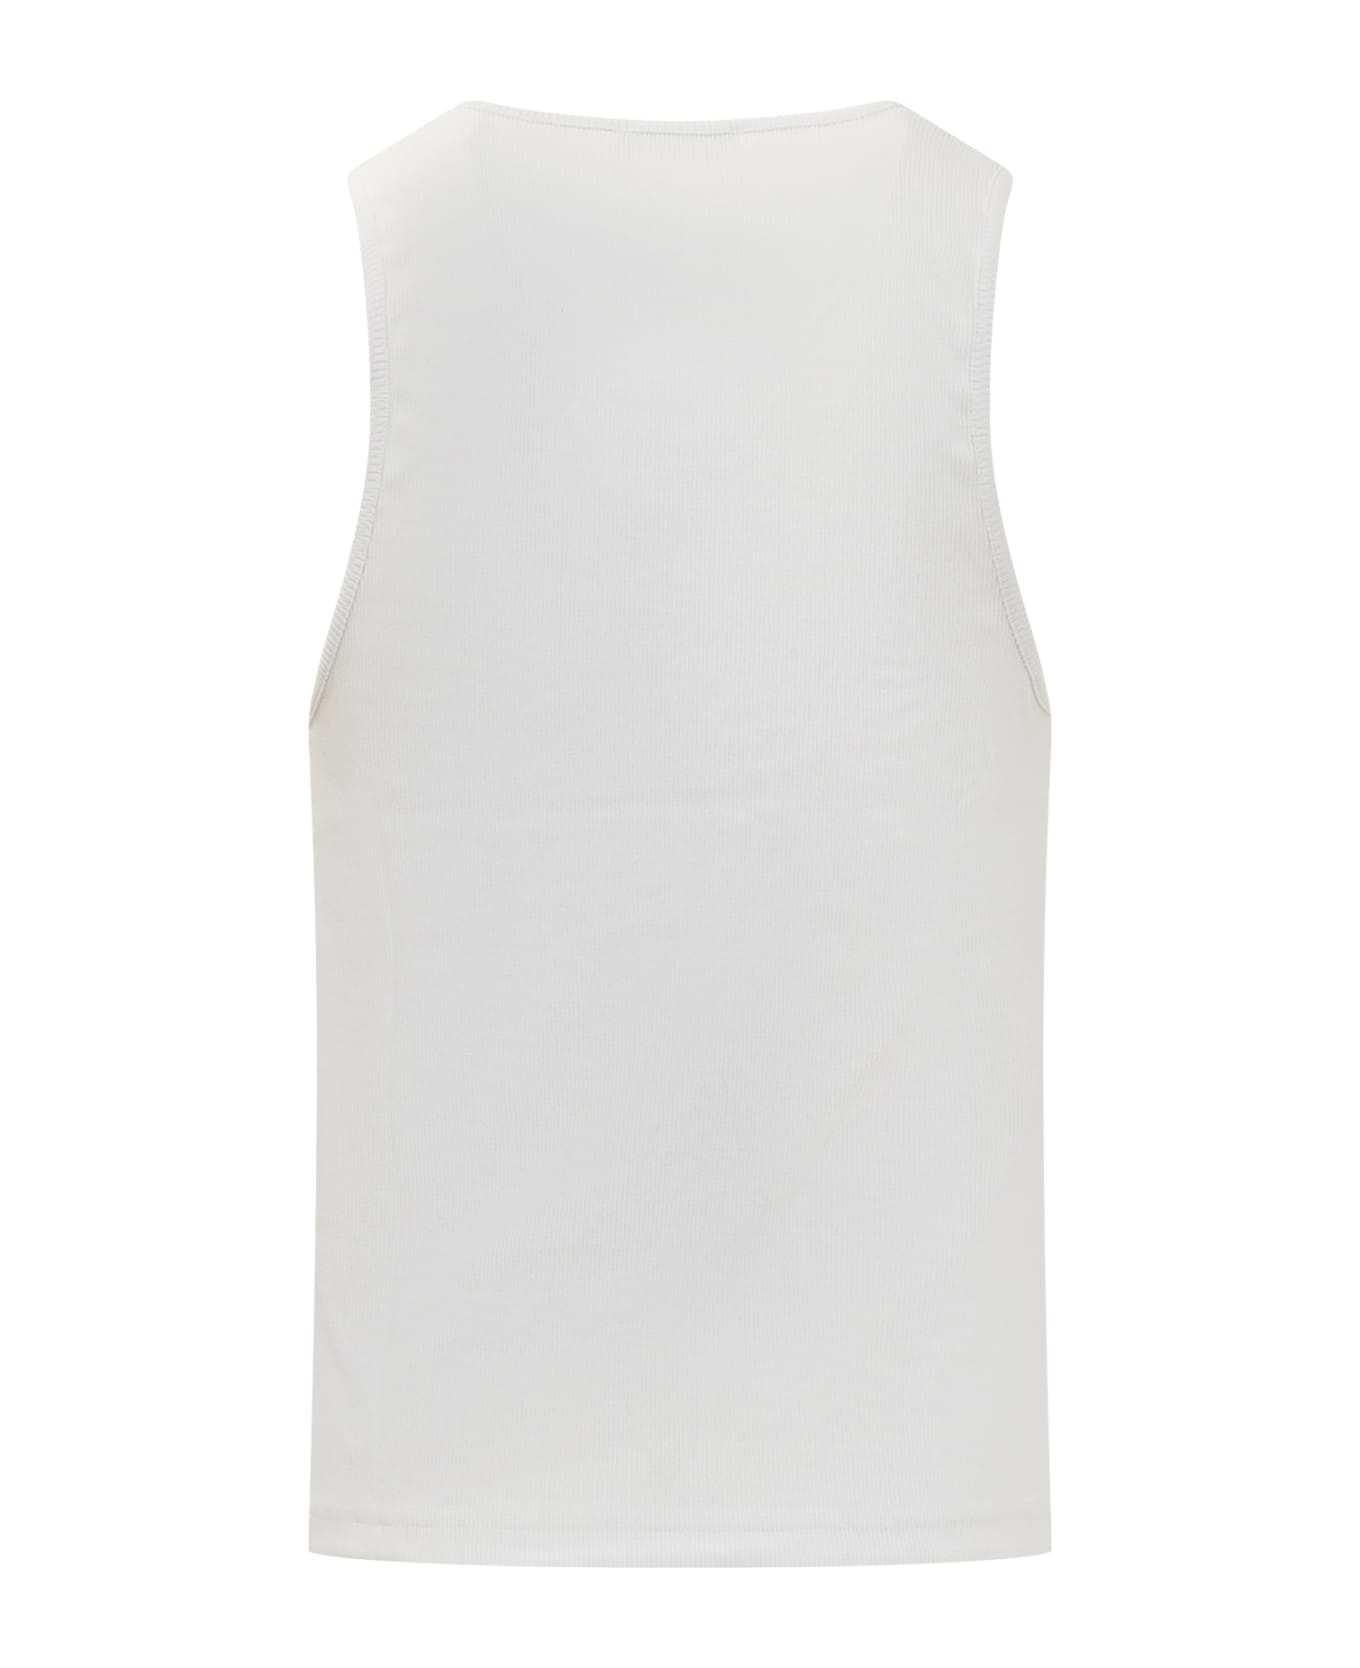 J.W. Anderson Anchor Tank Top - WHITE